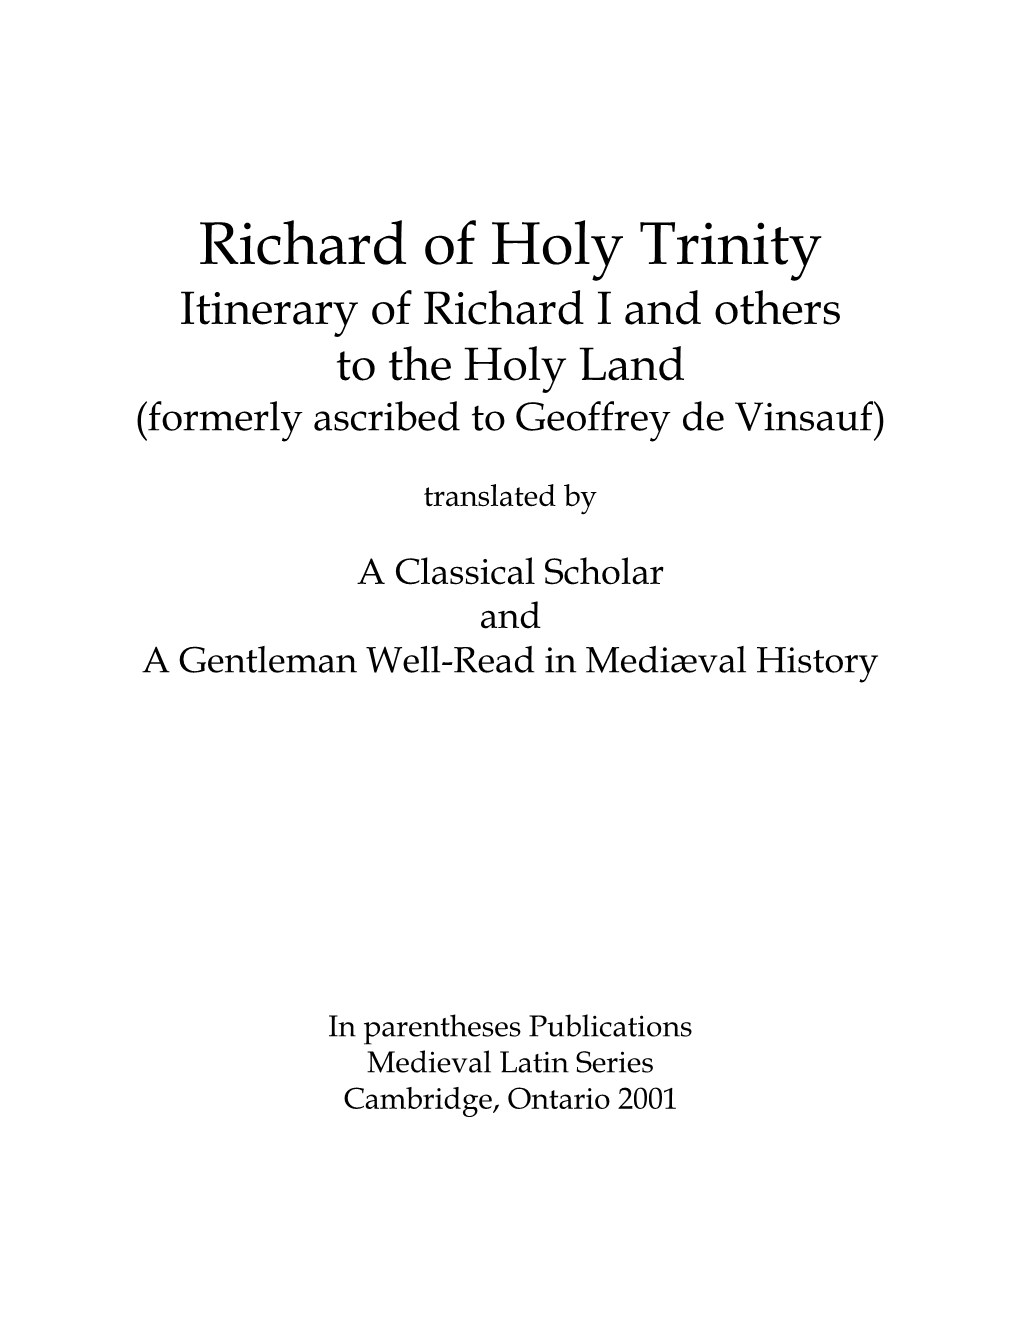 Richard of Holy Trinity Itinerary of Richard I and Others to the Holy Land (Formerly Ascribed to Geoffrey De Vinsauf)